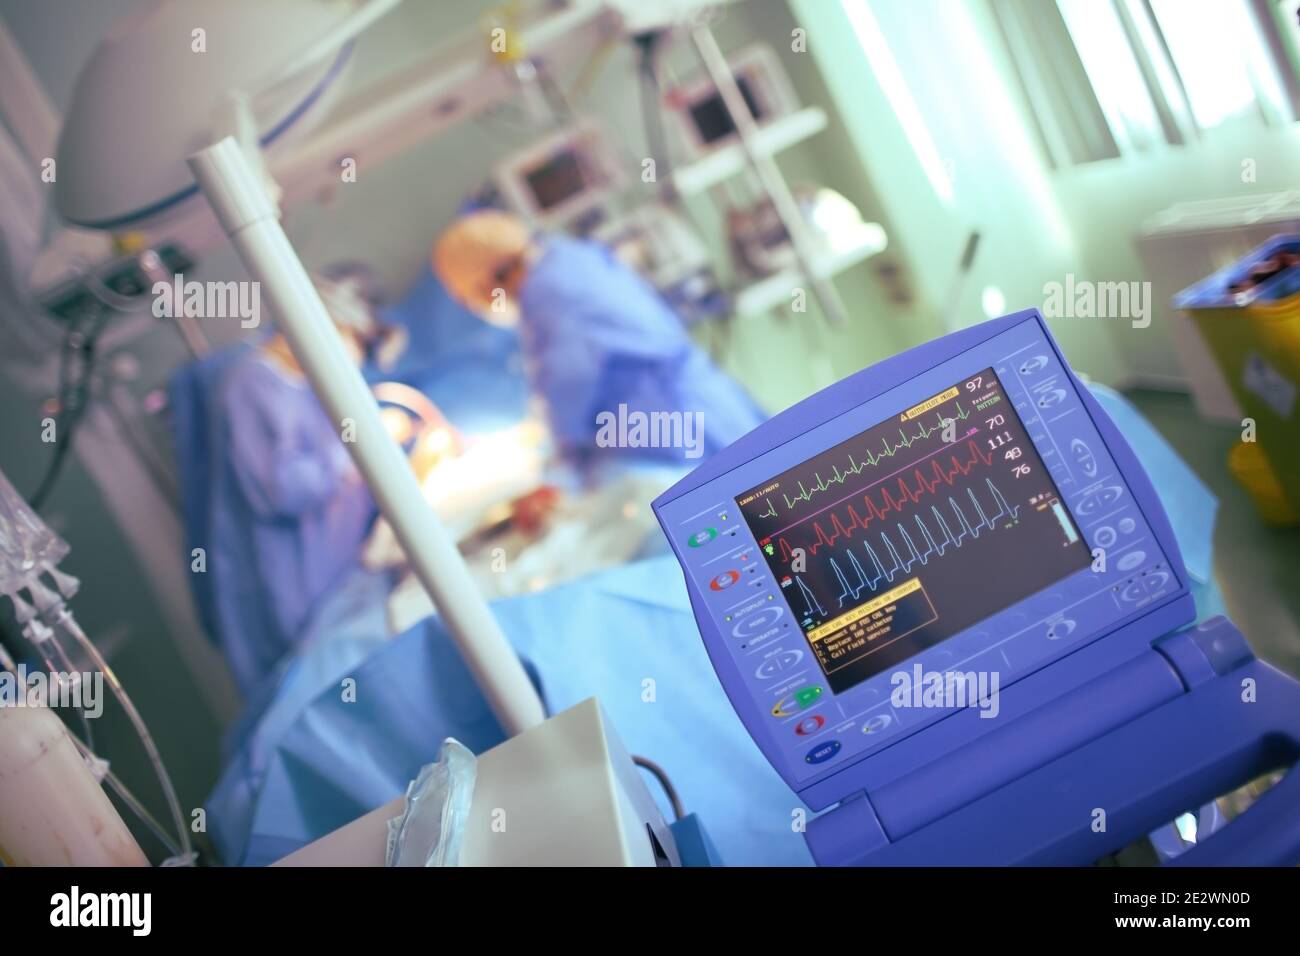 Monitoring of heart function during medical procedure. Stock Photo